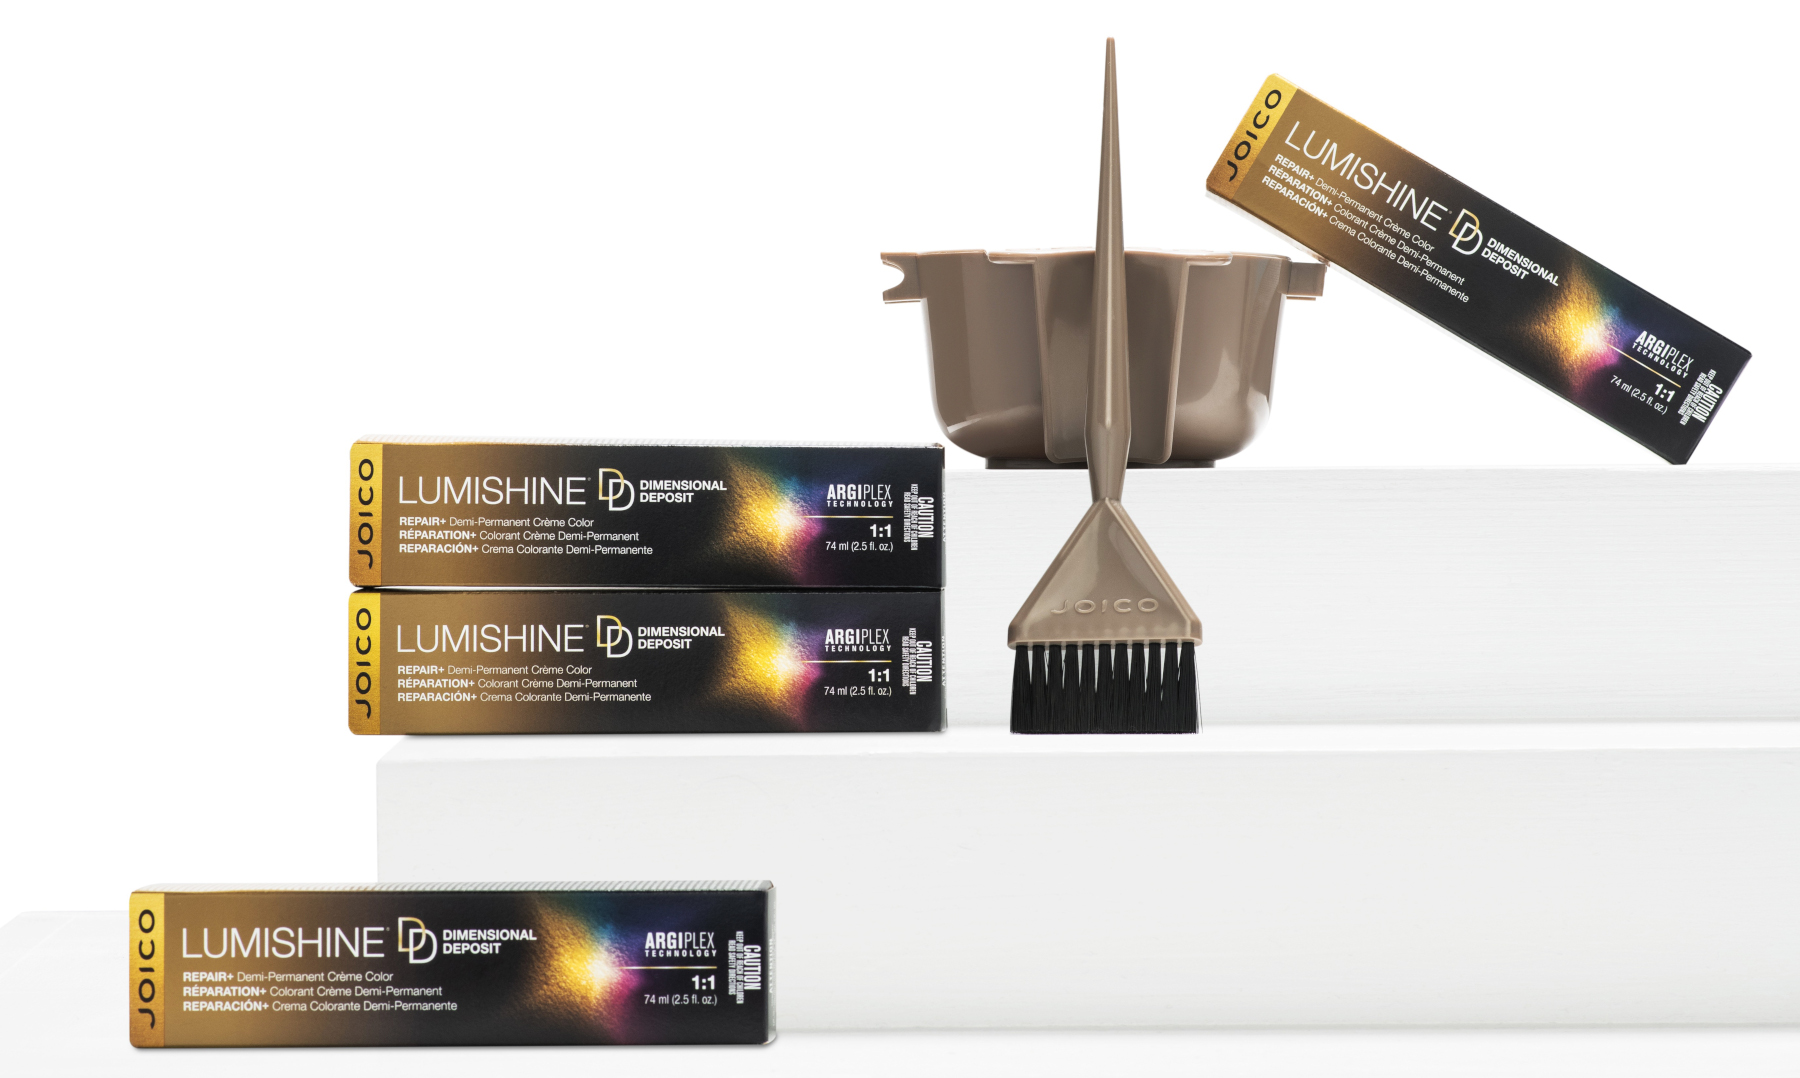 lumishine demi-permanent creme color boxes with mixing bowl and brush